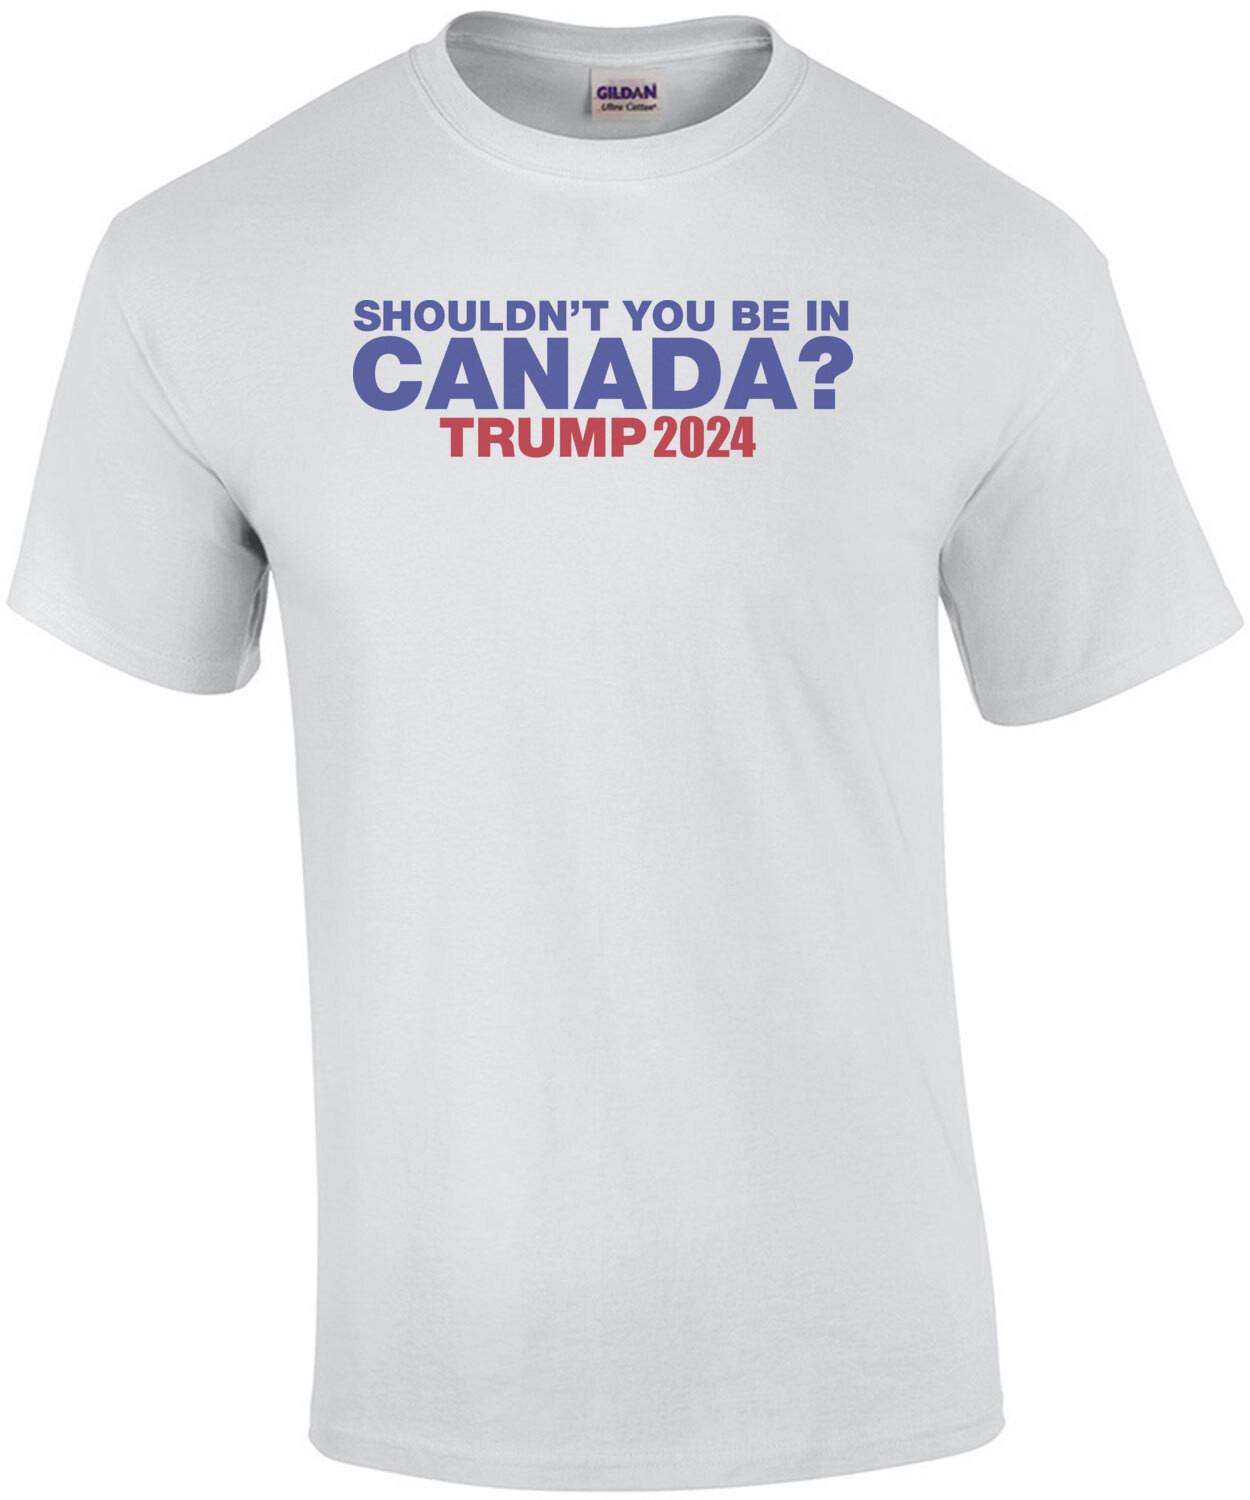 Shouldn't You Be In Canada? - Trump 2024 Tee